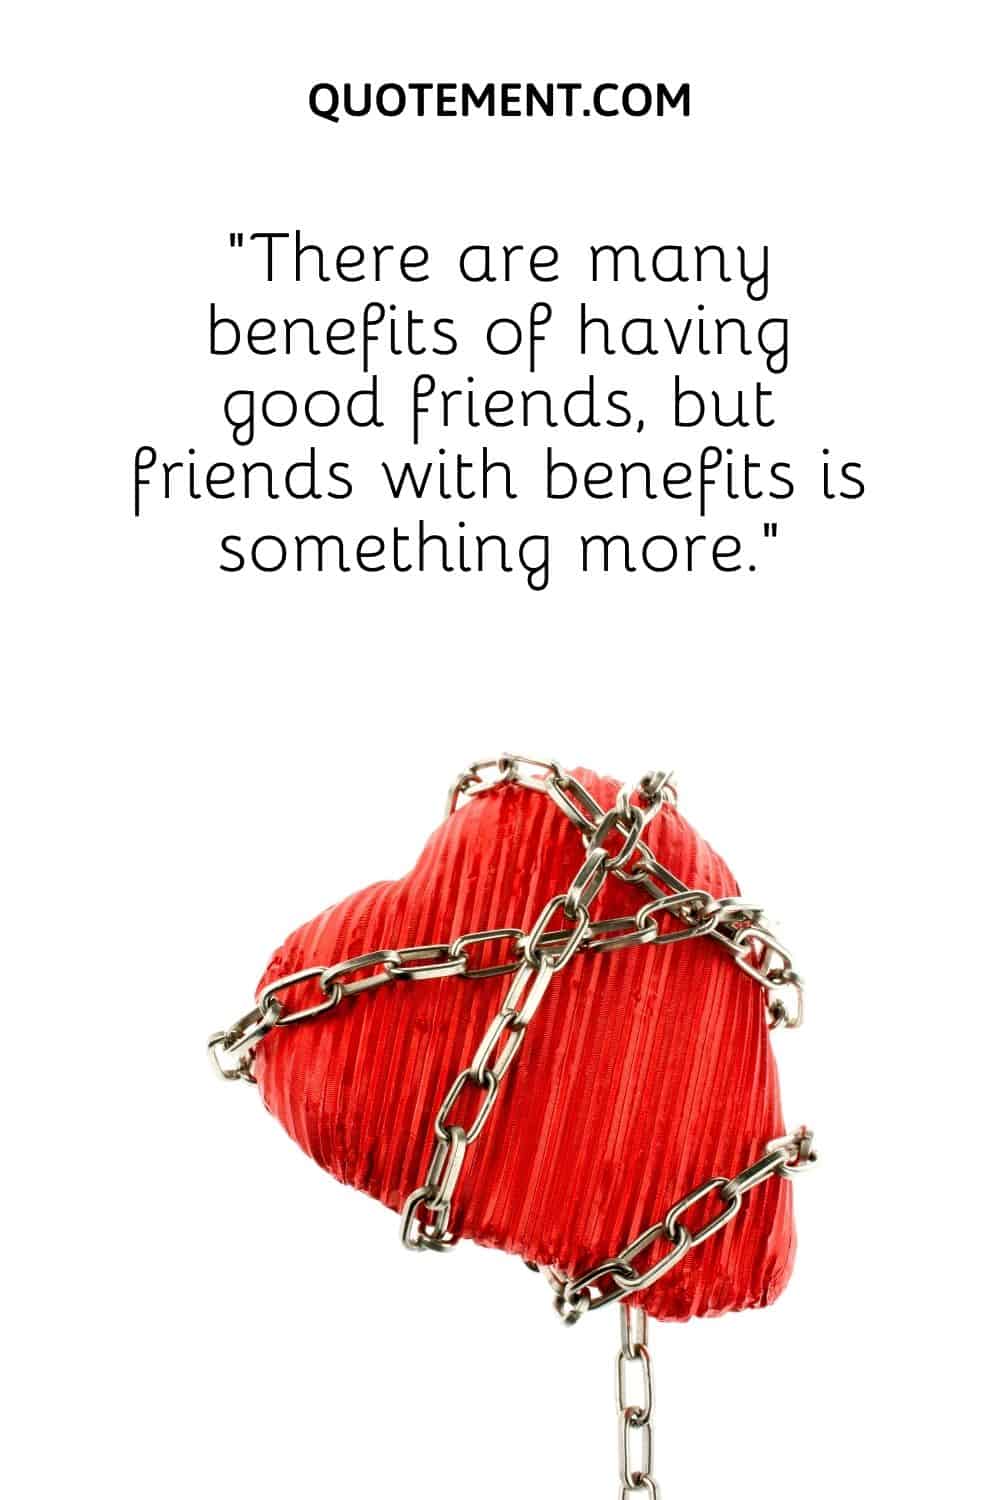 “There are many benefits of having good friends, but friends with benefits is something more.”